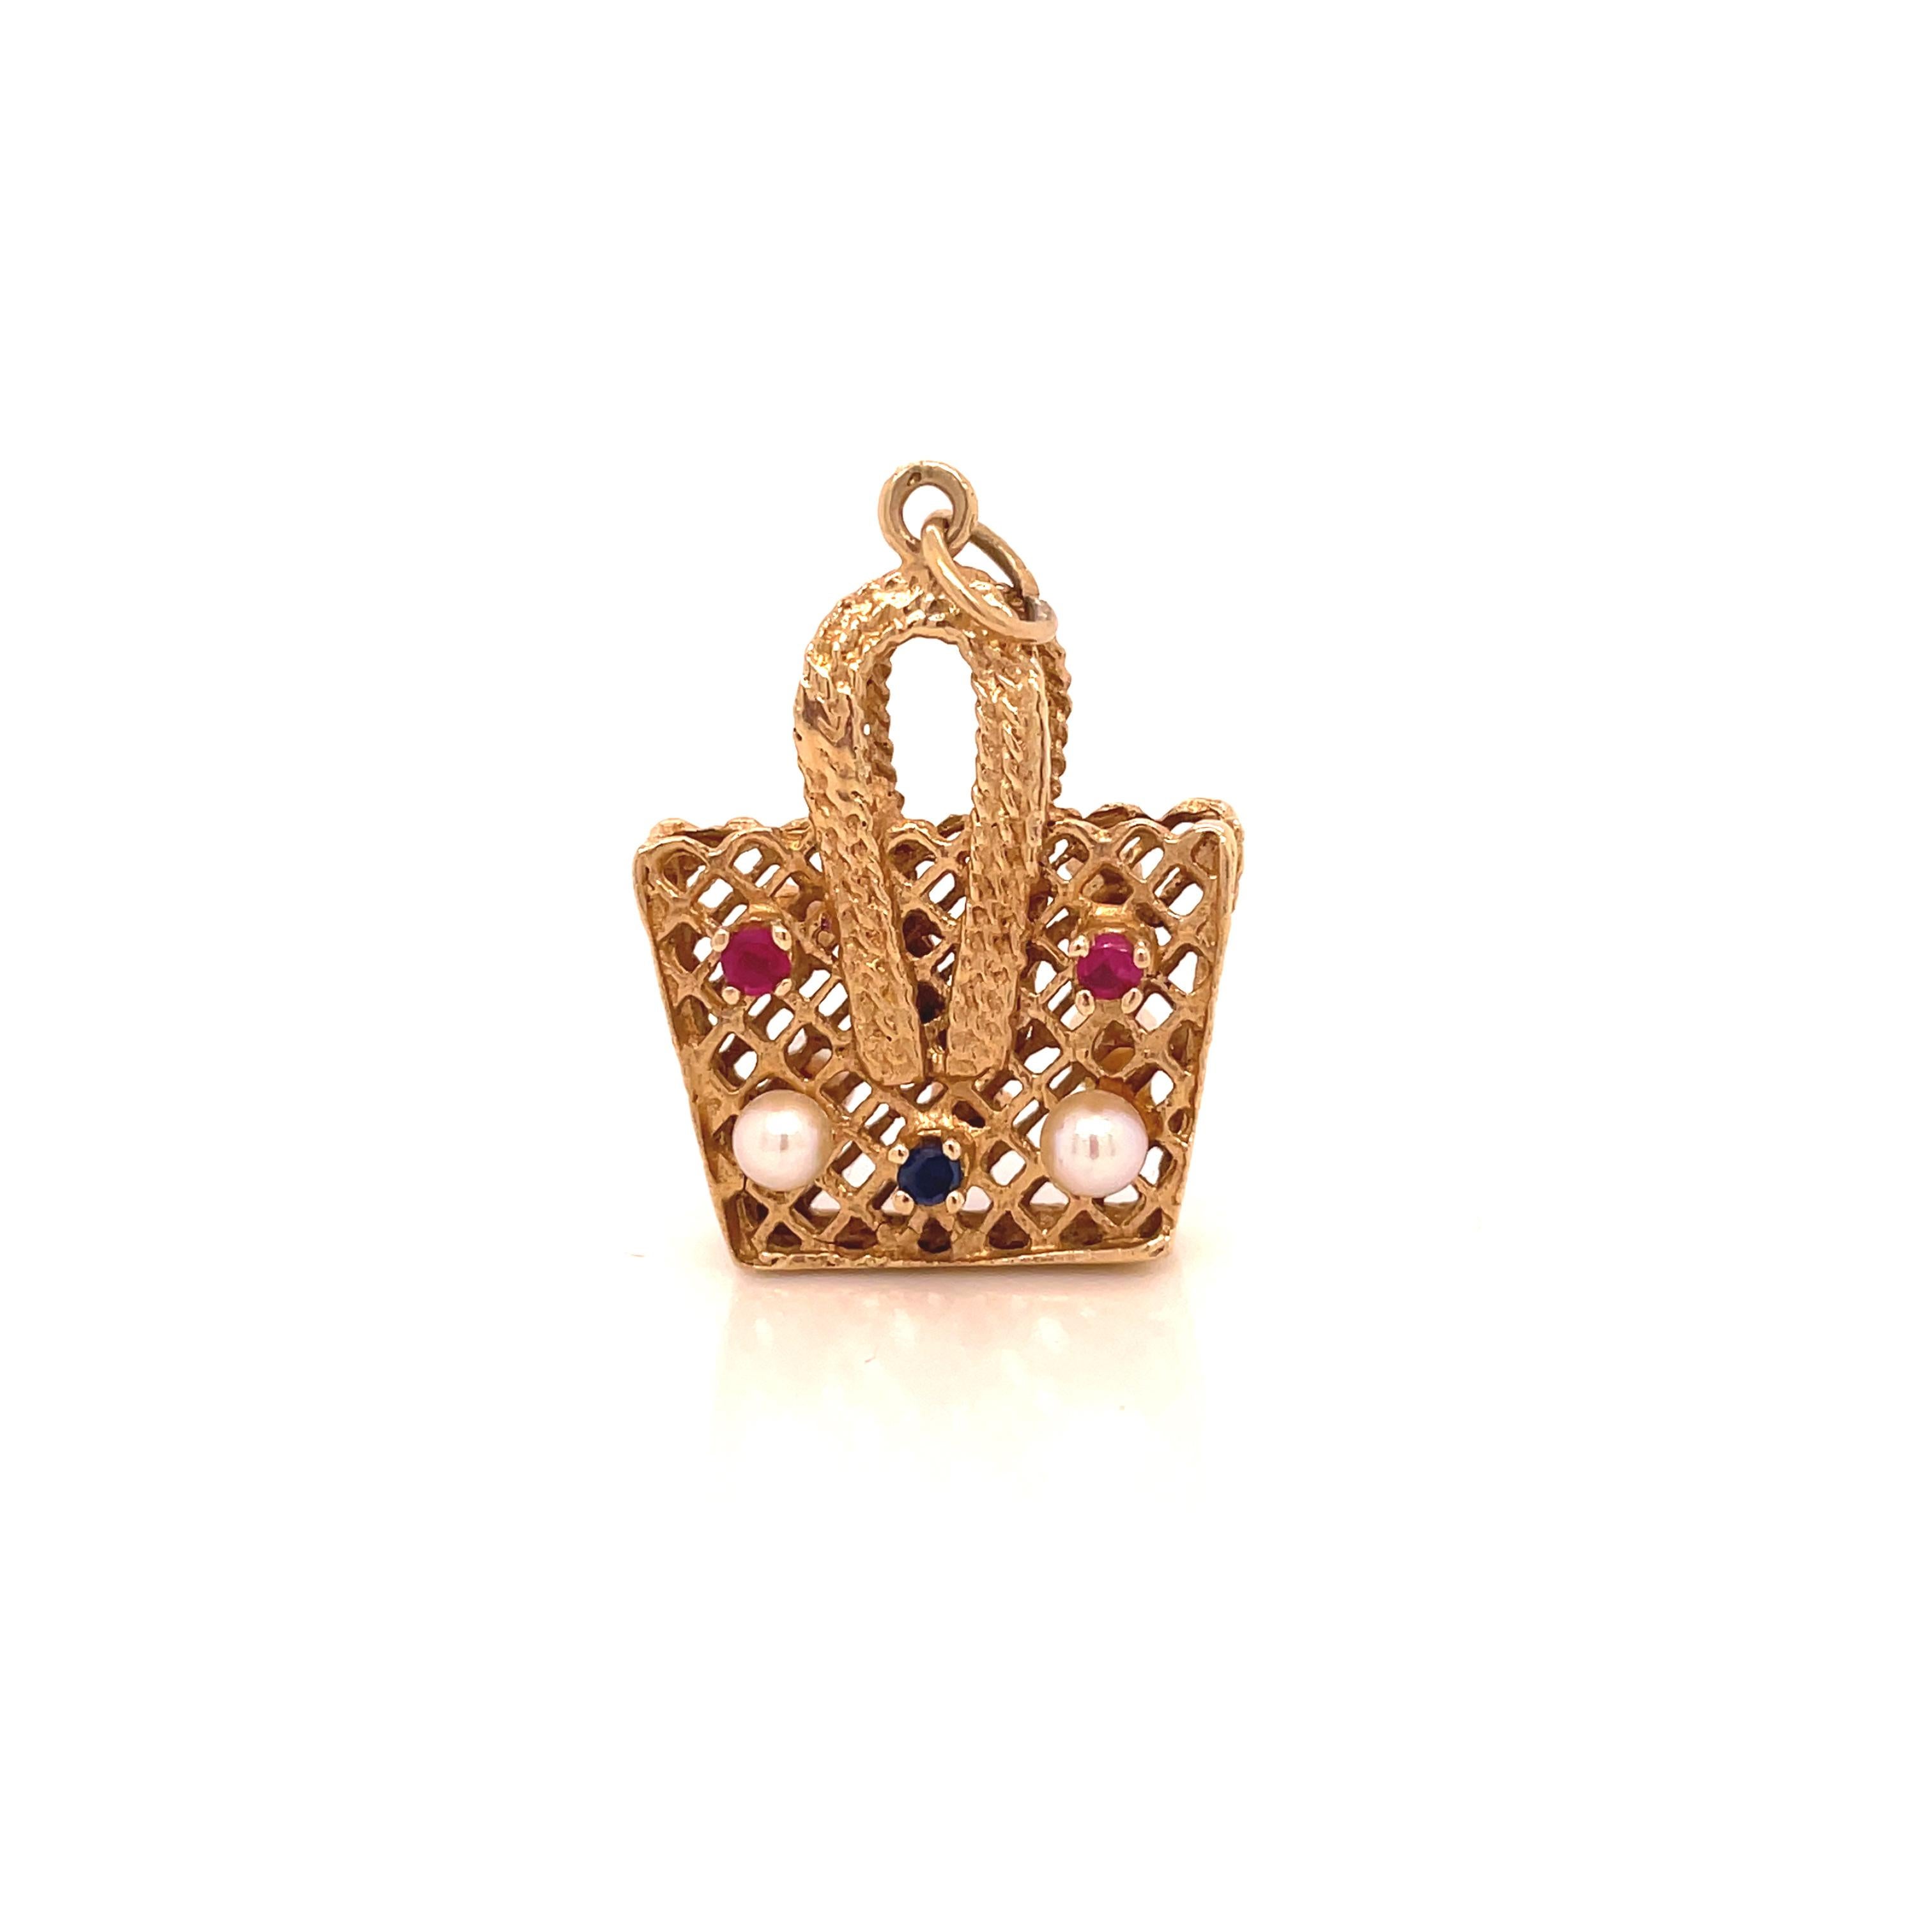 This is a darling 14K yellow gold picnic basket charm that dates back to the 1960s decorated with beautiful rubies, sapphires, and freshwater pearls! This little picnic basket is just too cute! Wear it as a pendant or attach it to your charm